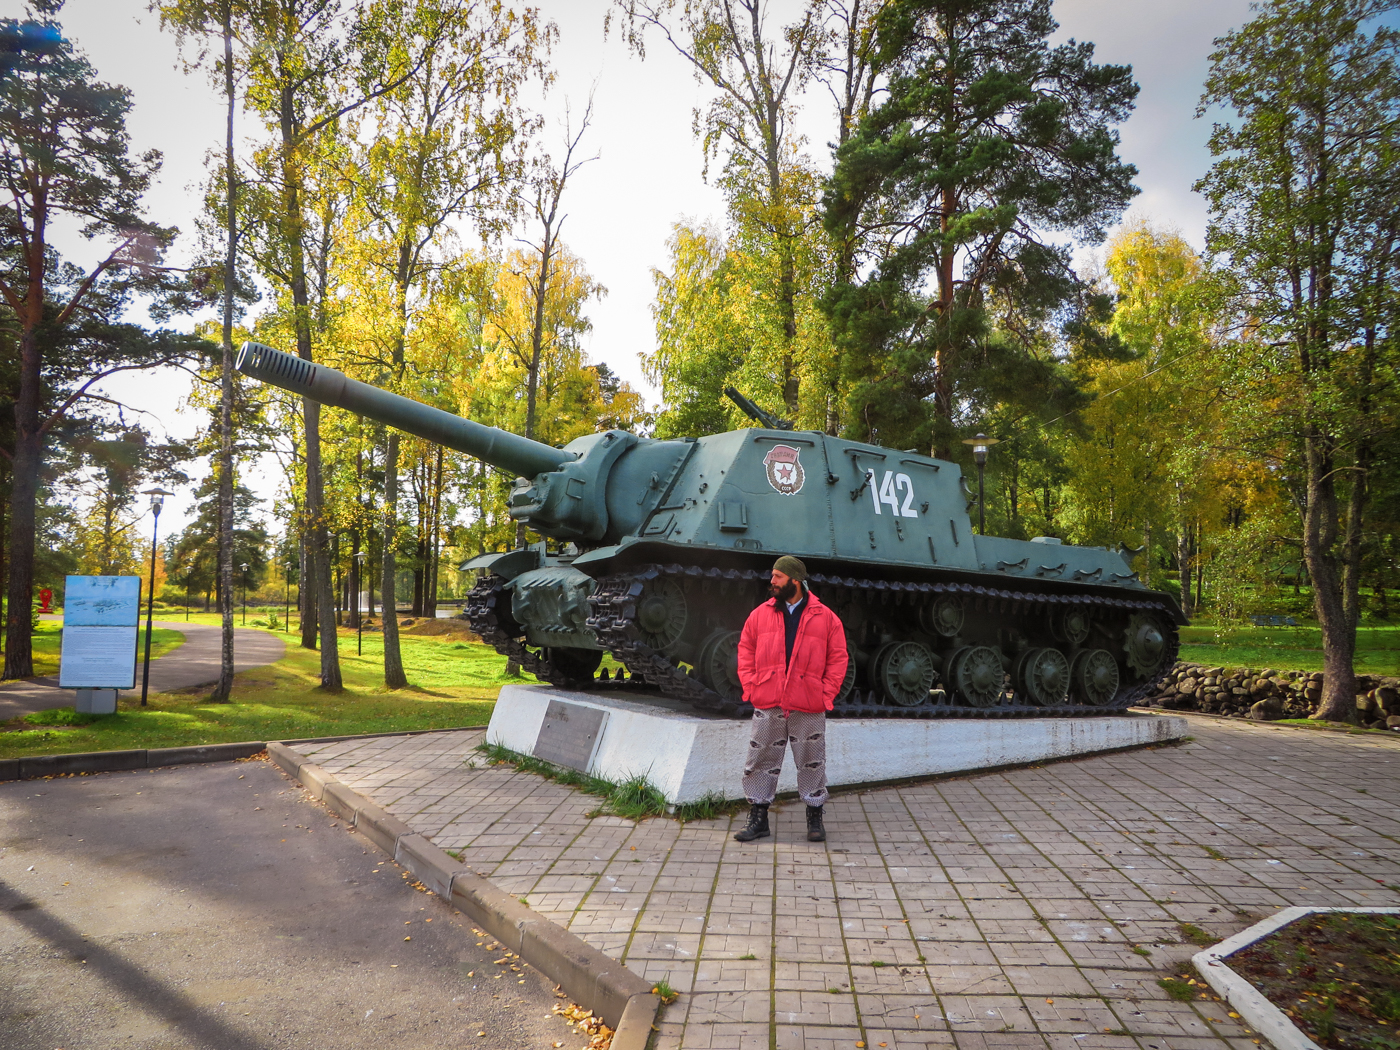 Tiago in front of a WWII tank in losevo Russia